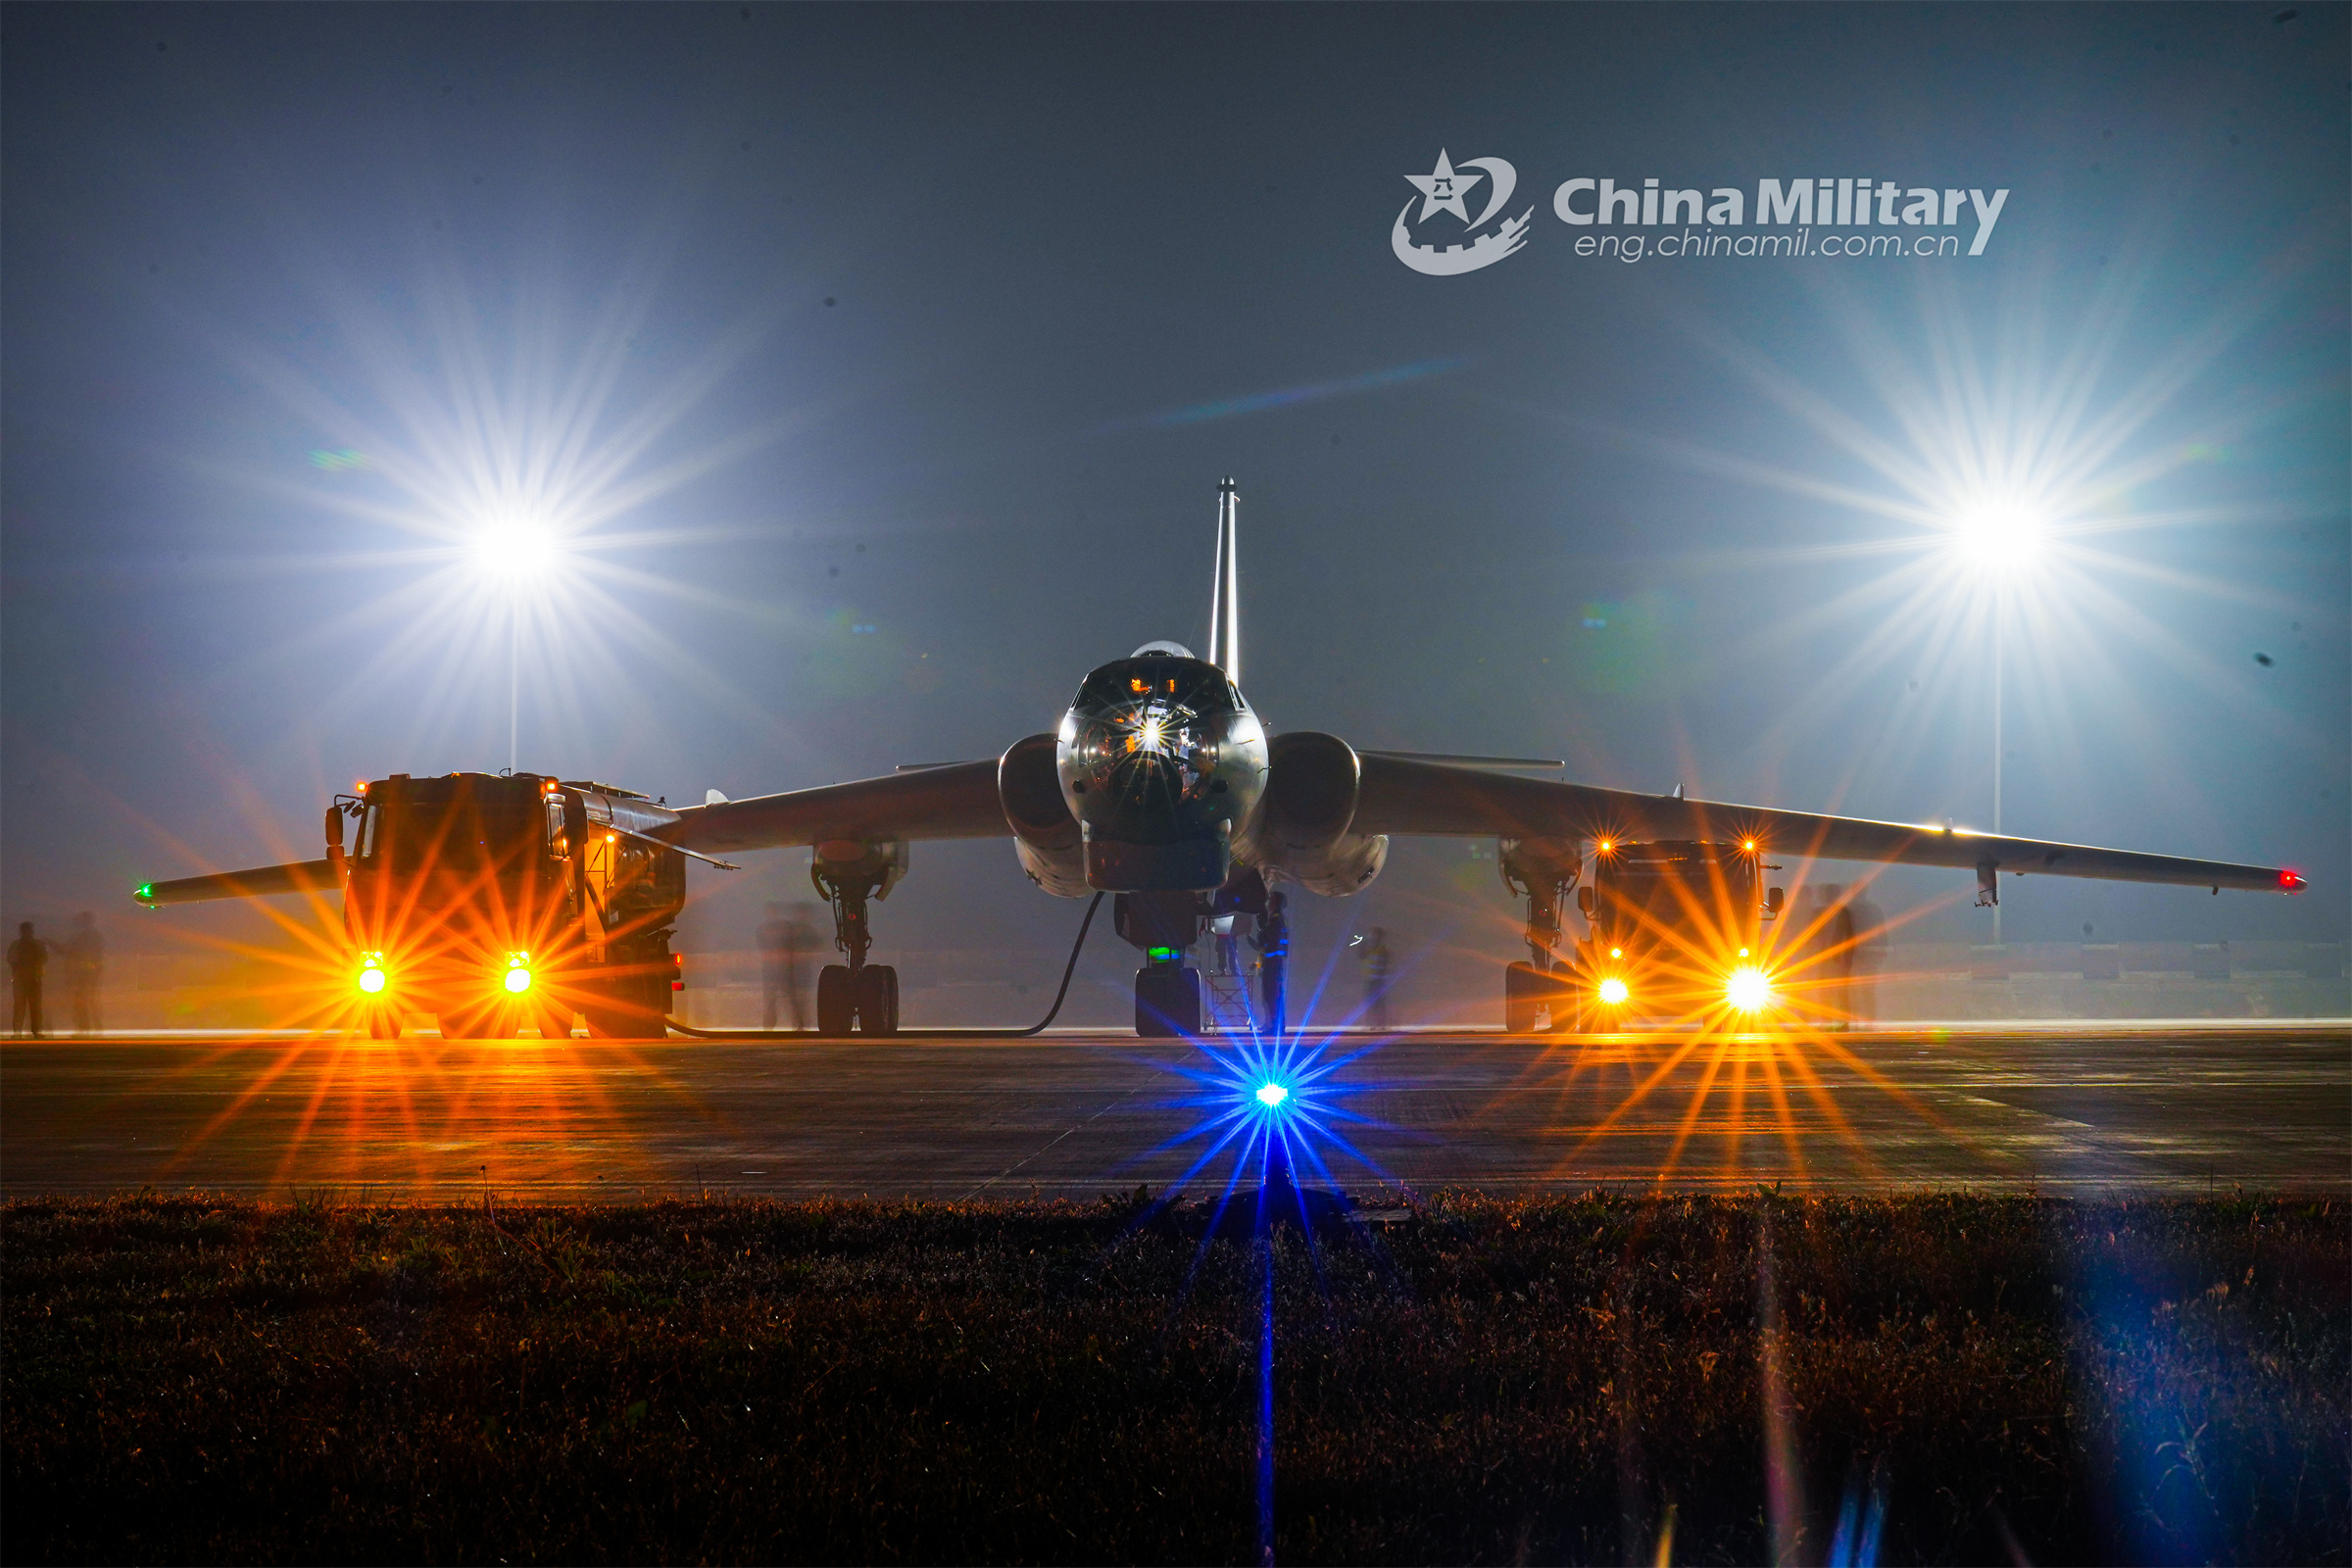 General 2400x1600 China aircraft truck Xian H-6 PLAAF military watermarked night military training Chinese aircraft lights frontal view headlights